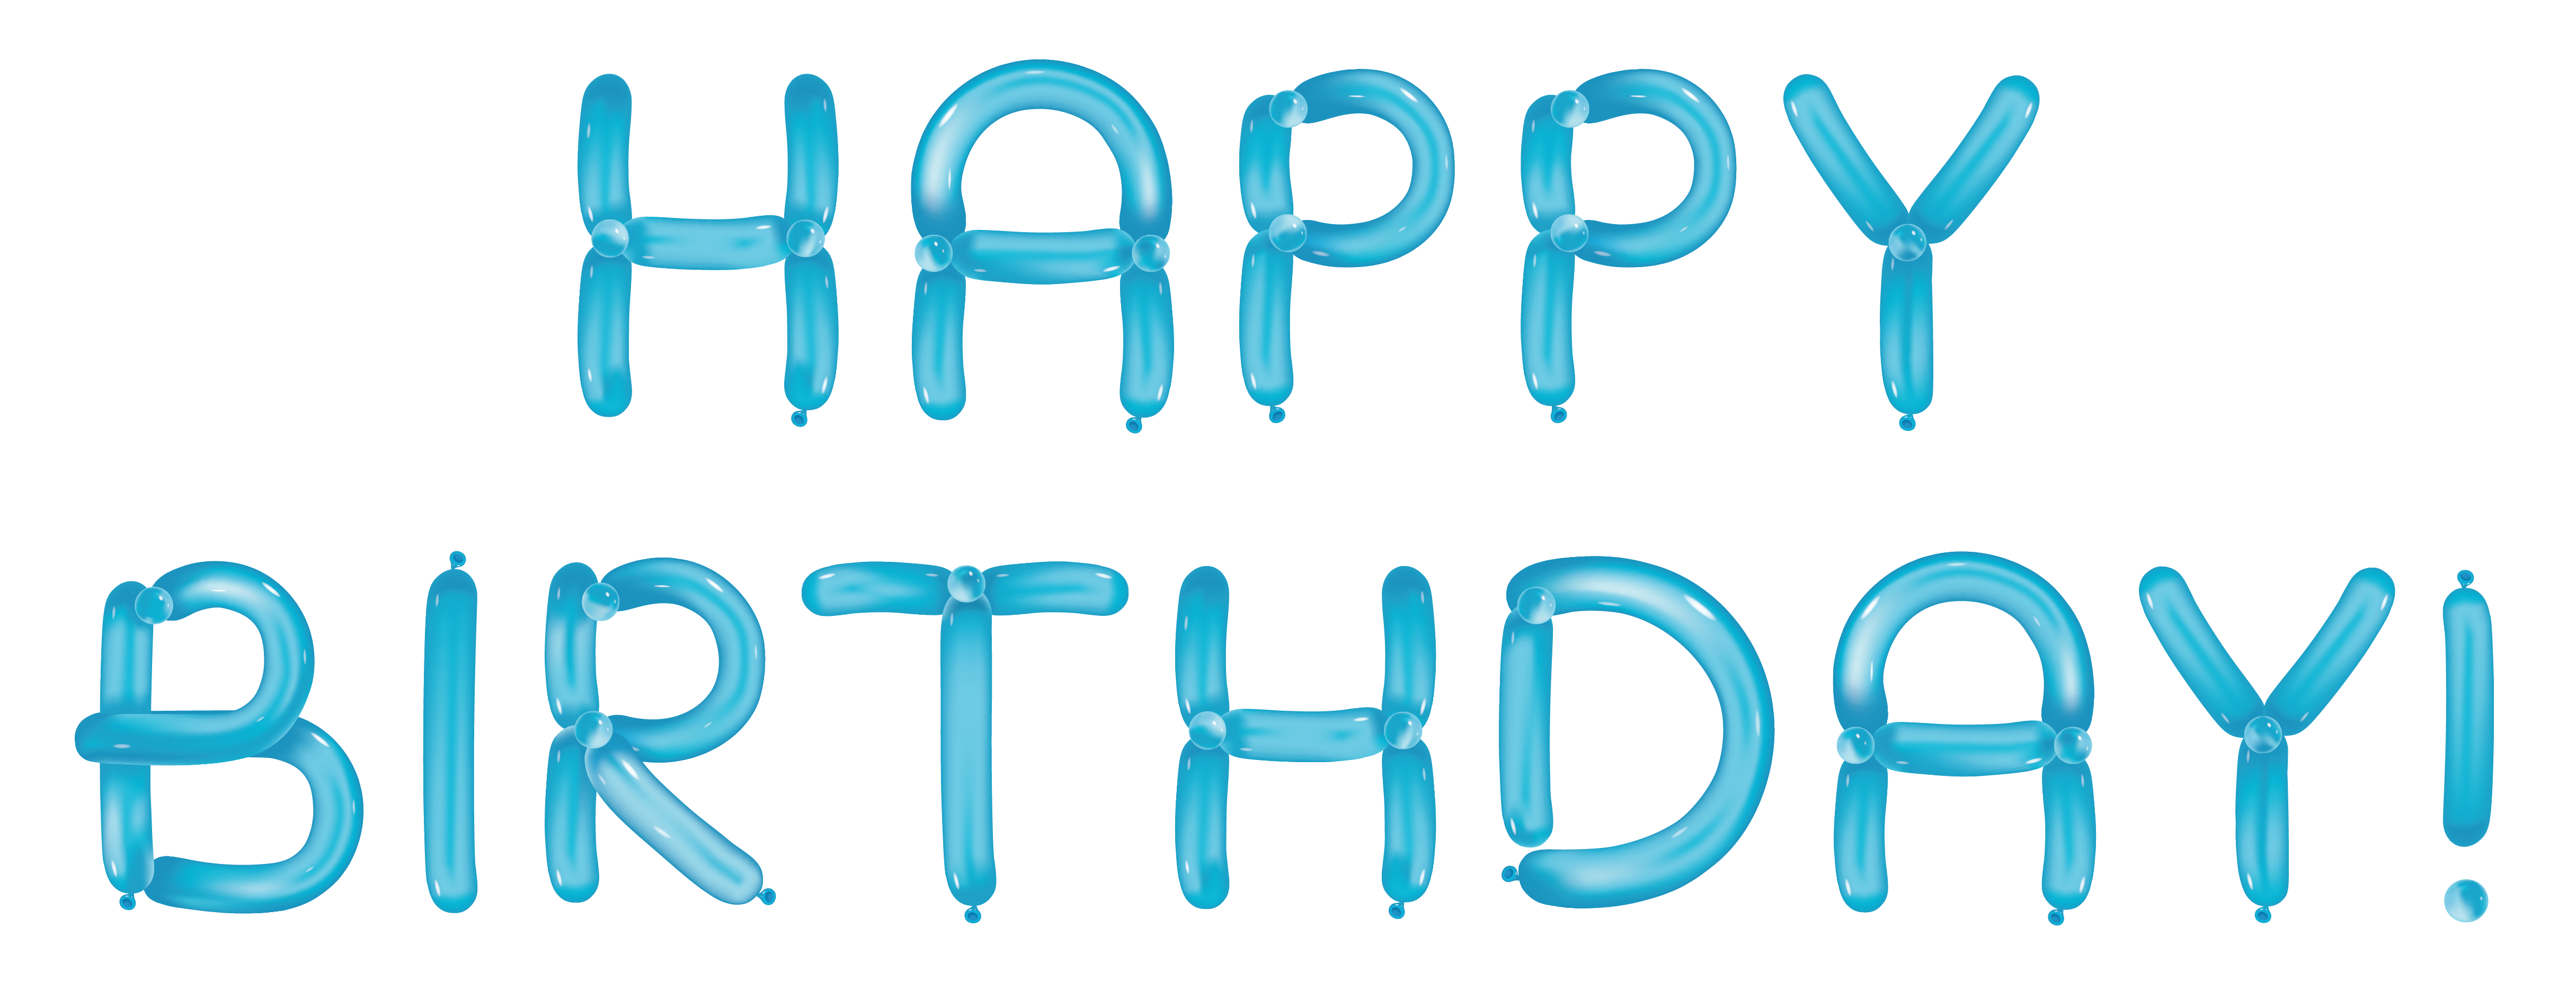 Happy_Birthday_with_Blue_Balloons_Transparent_Clipart.png?m=1399672800.